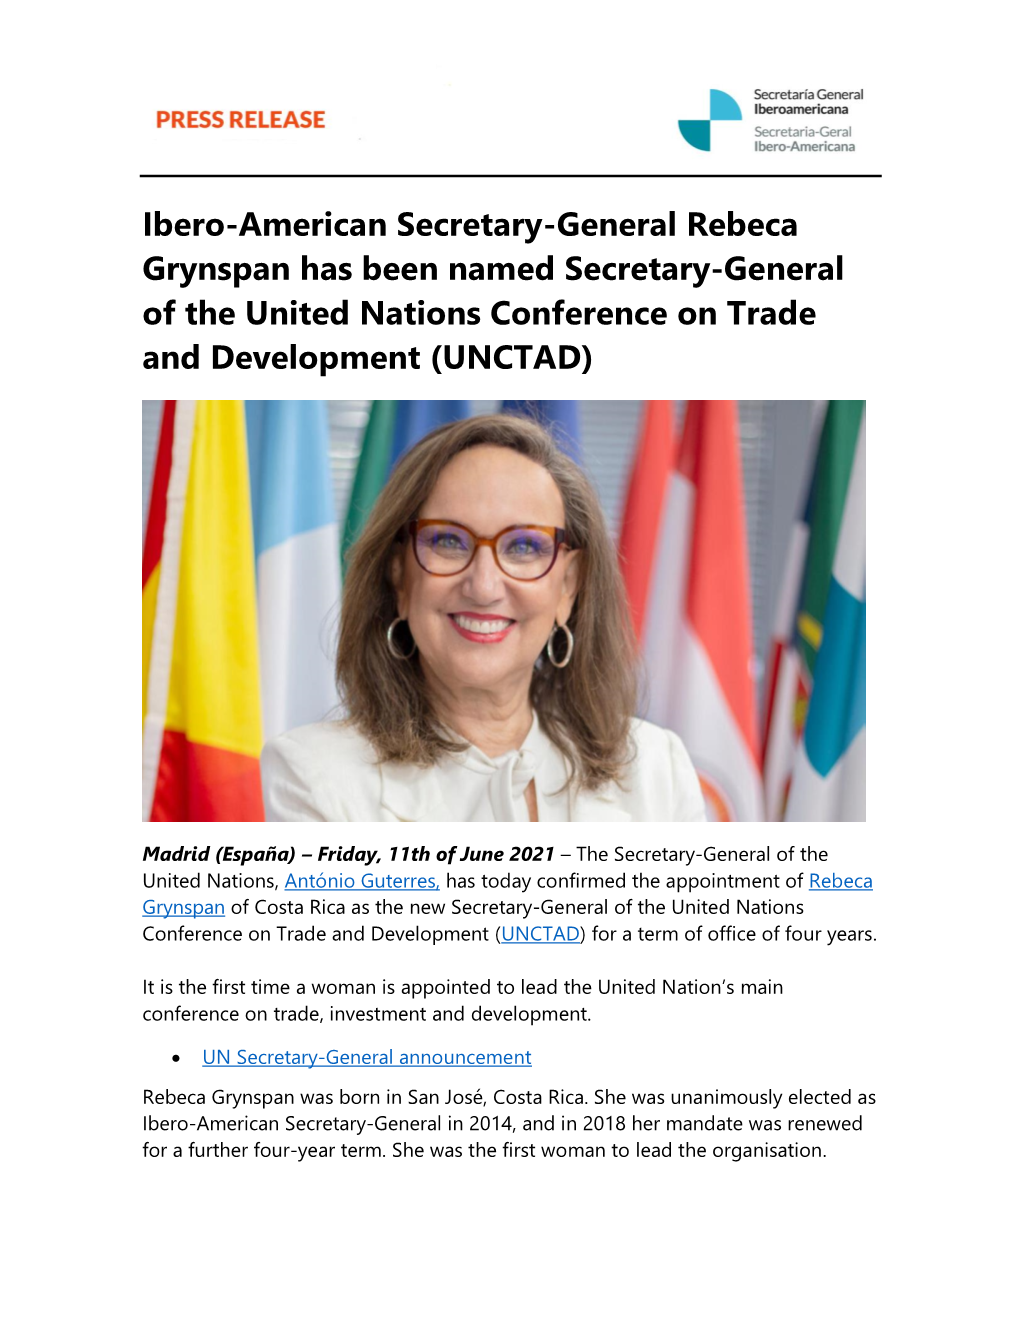 Ibero-American Secretary-General Rebeca Grynspan Has Been Named Secretary-General of the United Nations Conference on Trade and Development (UNCTAD)